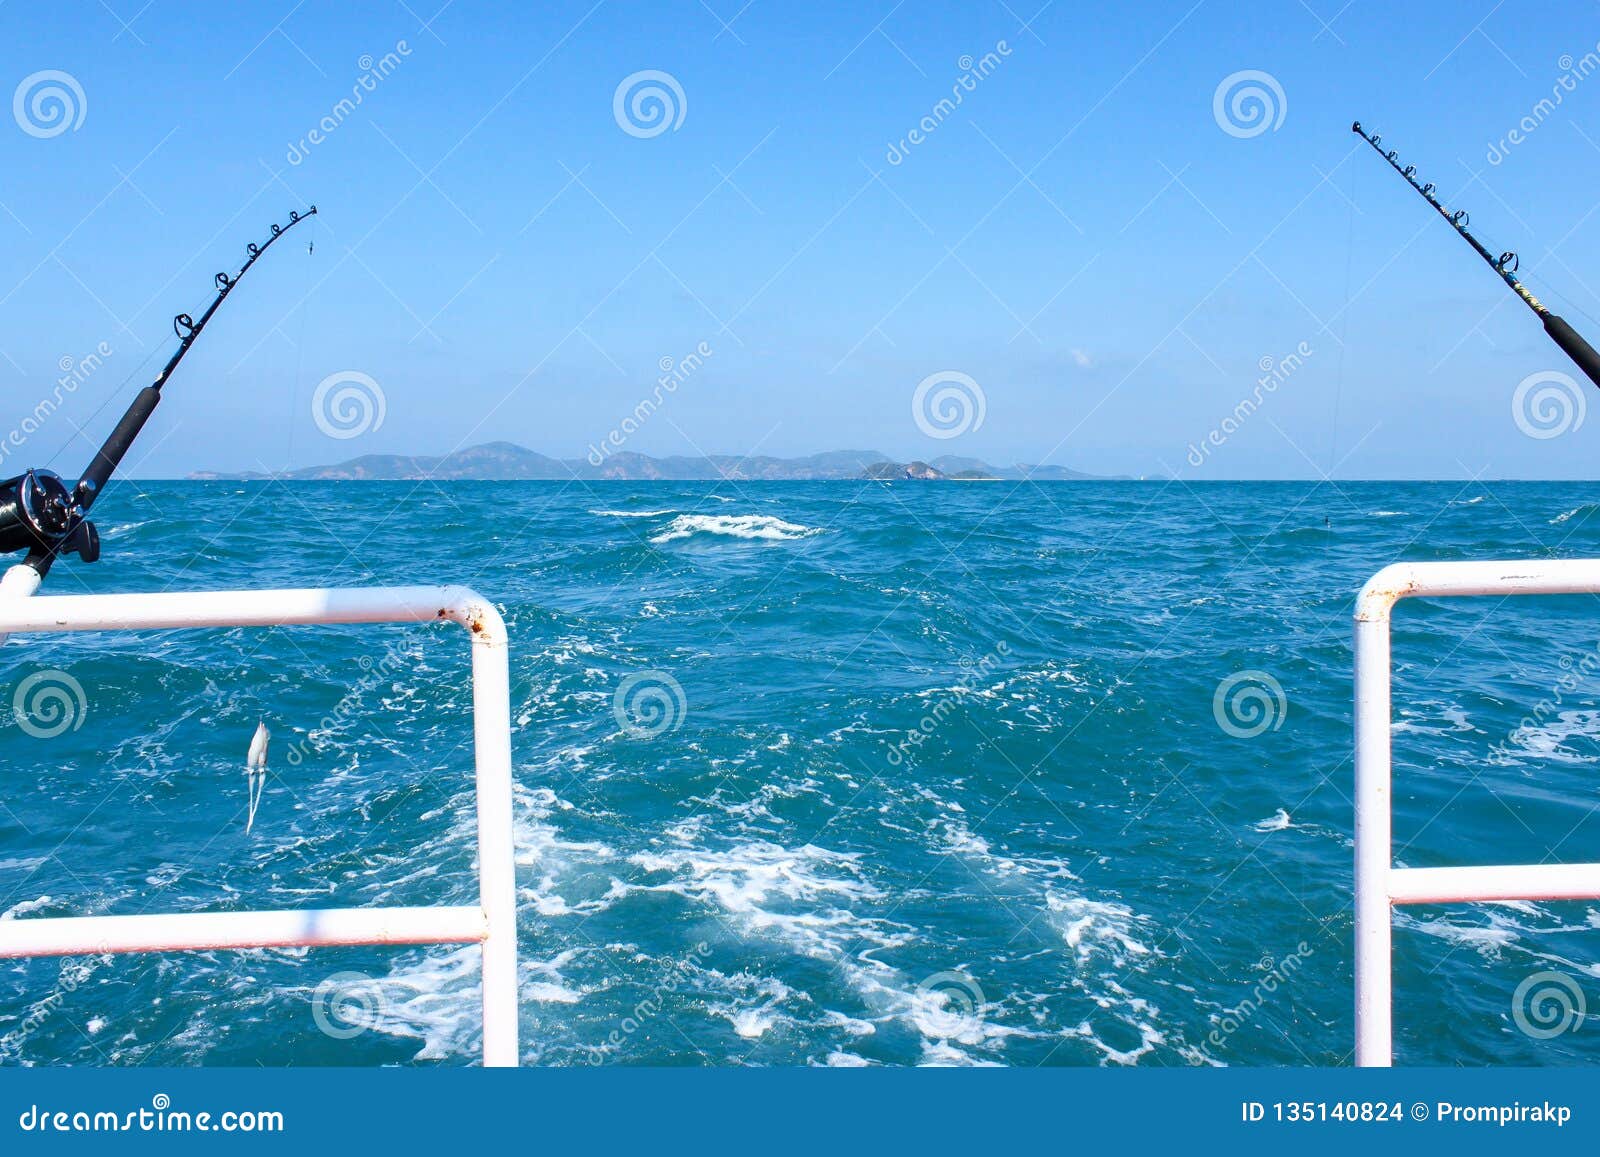 https://thumbs.dreamstime.com/z/fishing-rod-squid-hanging-fishing-line-prepared-to-offshore-fishing-boat-ocean-fishing-rod-squid-hanging-135140824.jpg